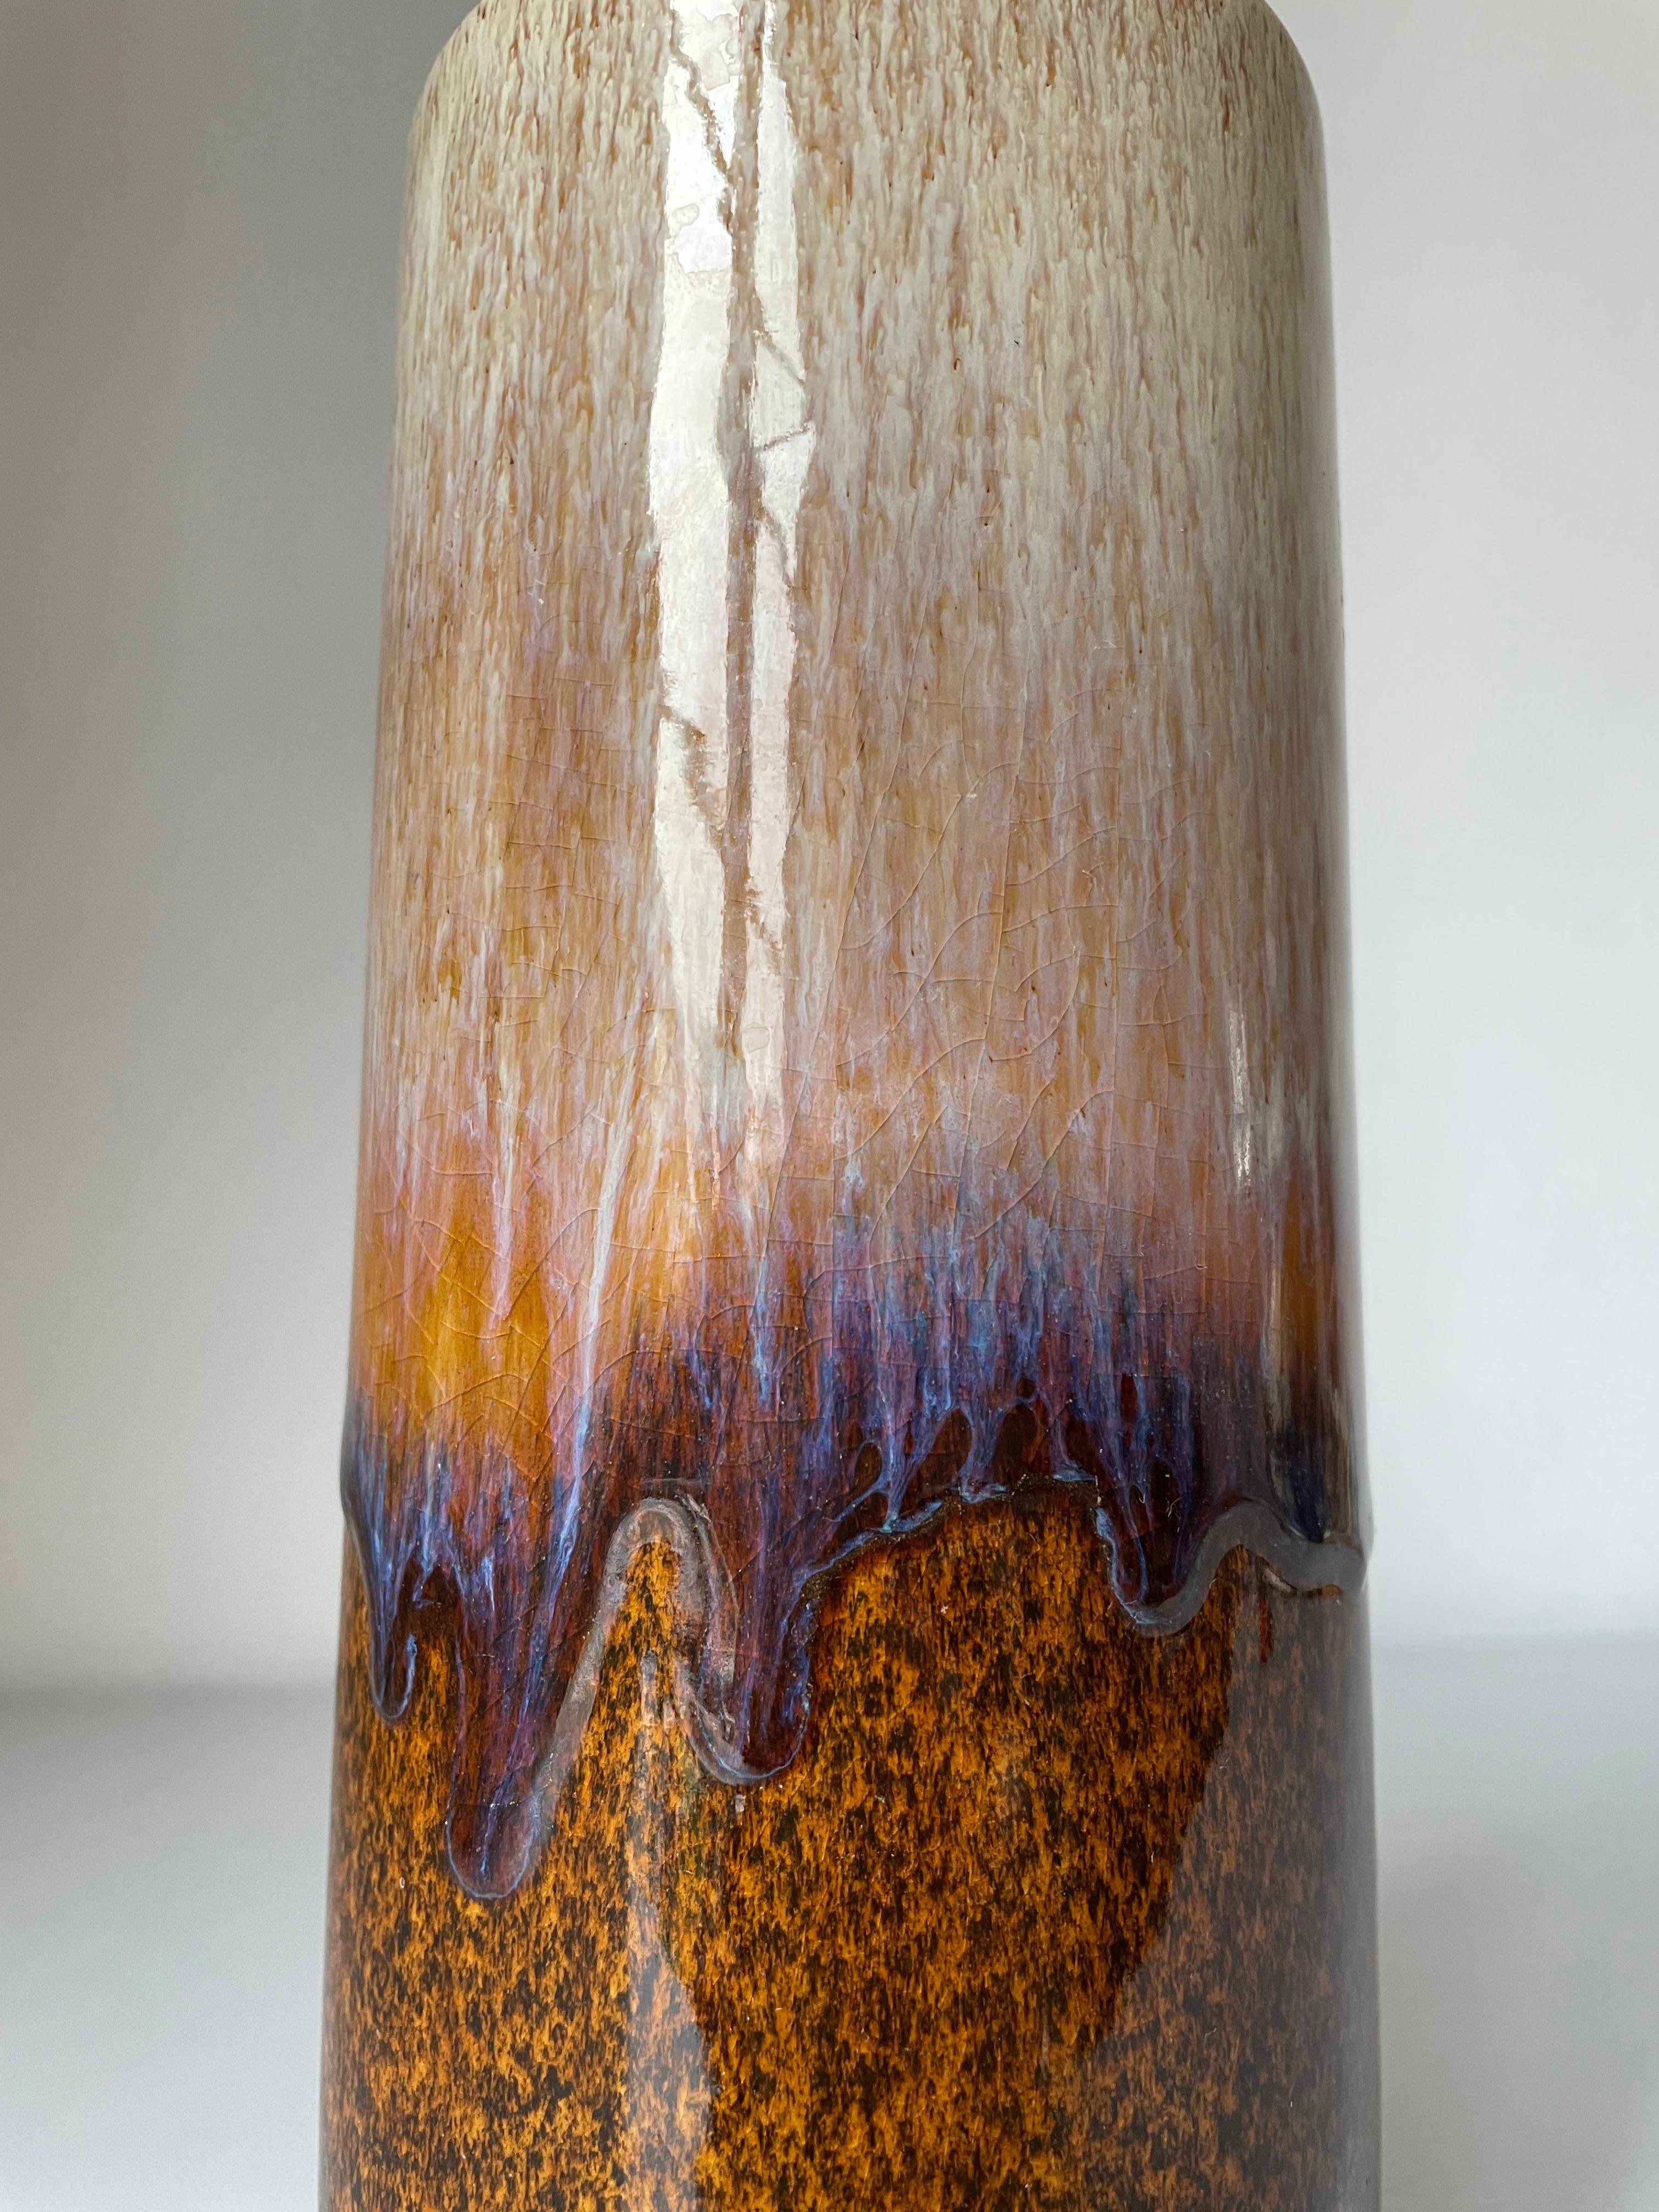 Glazed Earthcolored Running Glaze Ceramic Table Lamp, 1960s For Sale